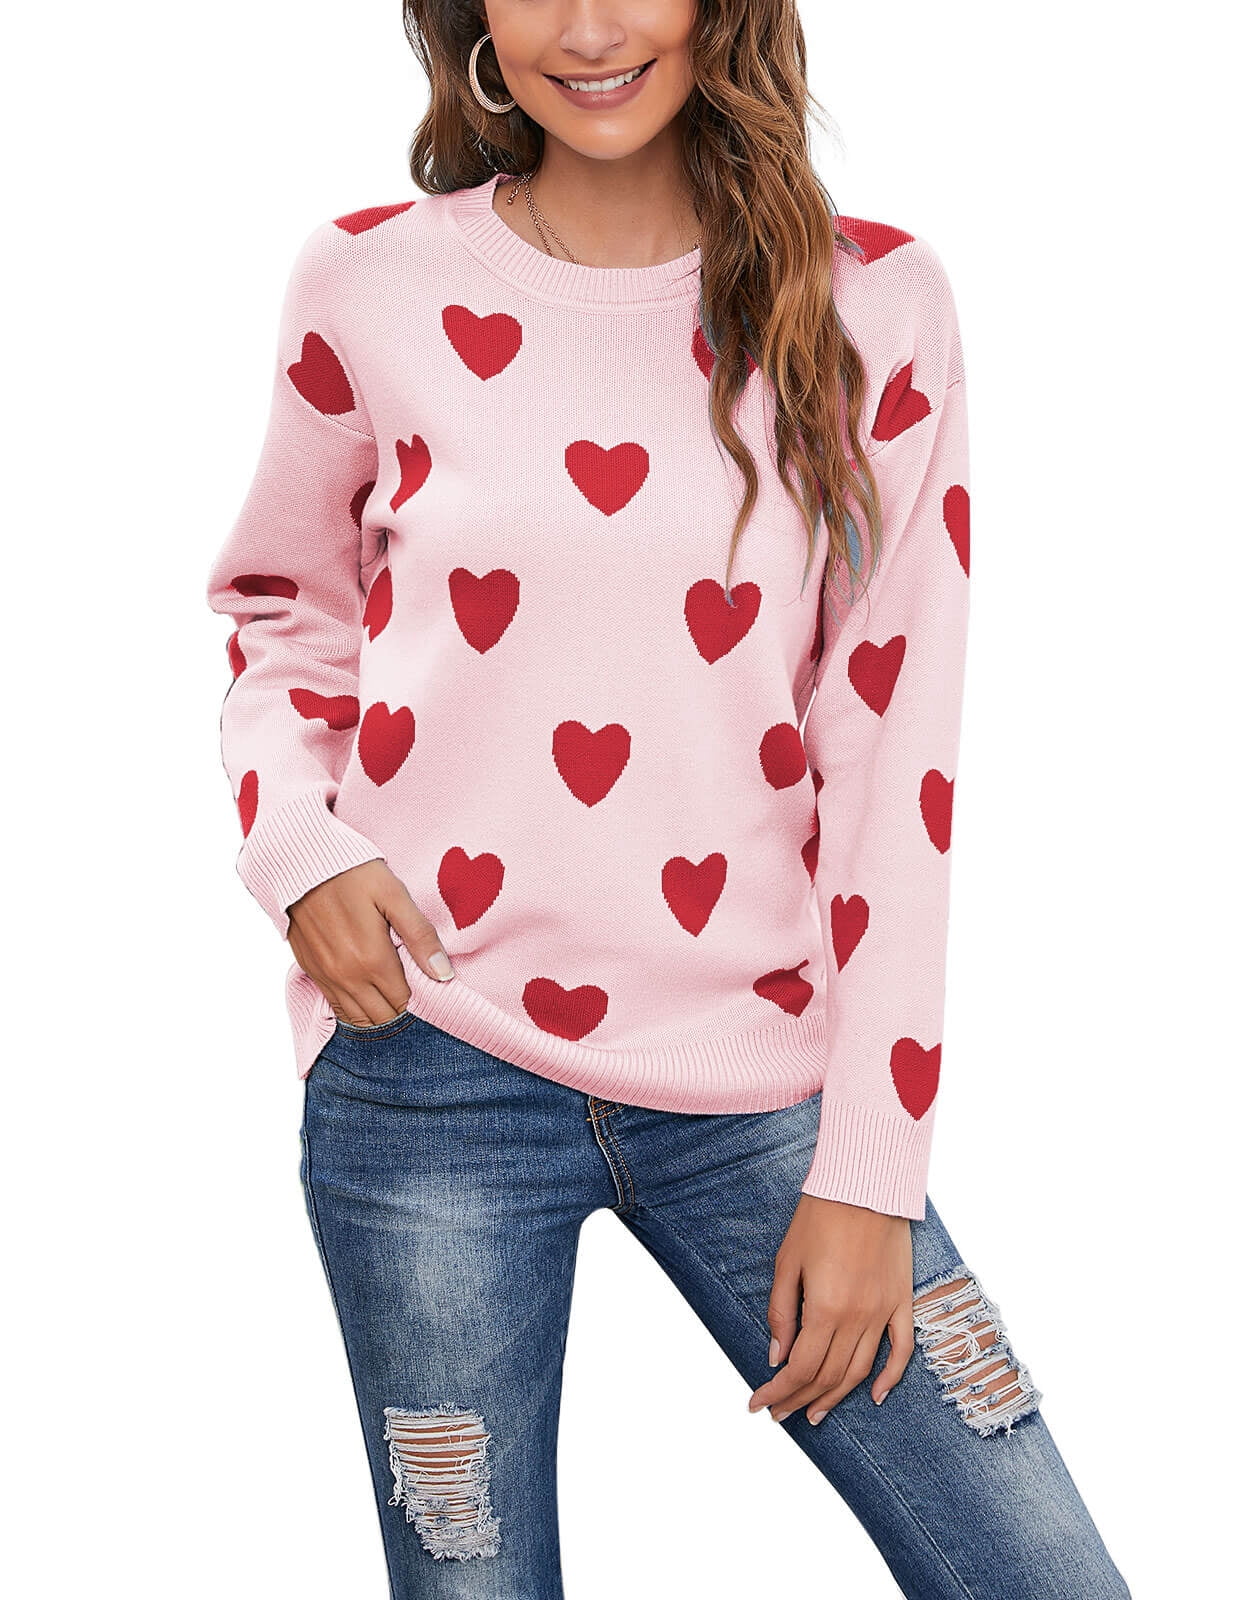 Pullover Sweater for Women Valentine's Day Cute Heart Print Warm ...